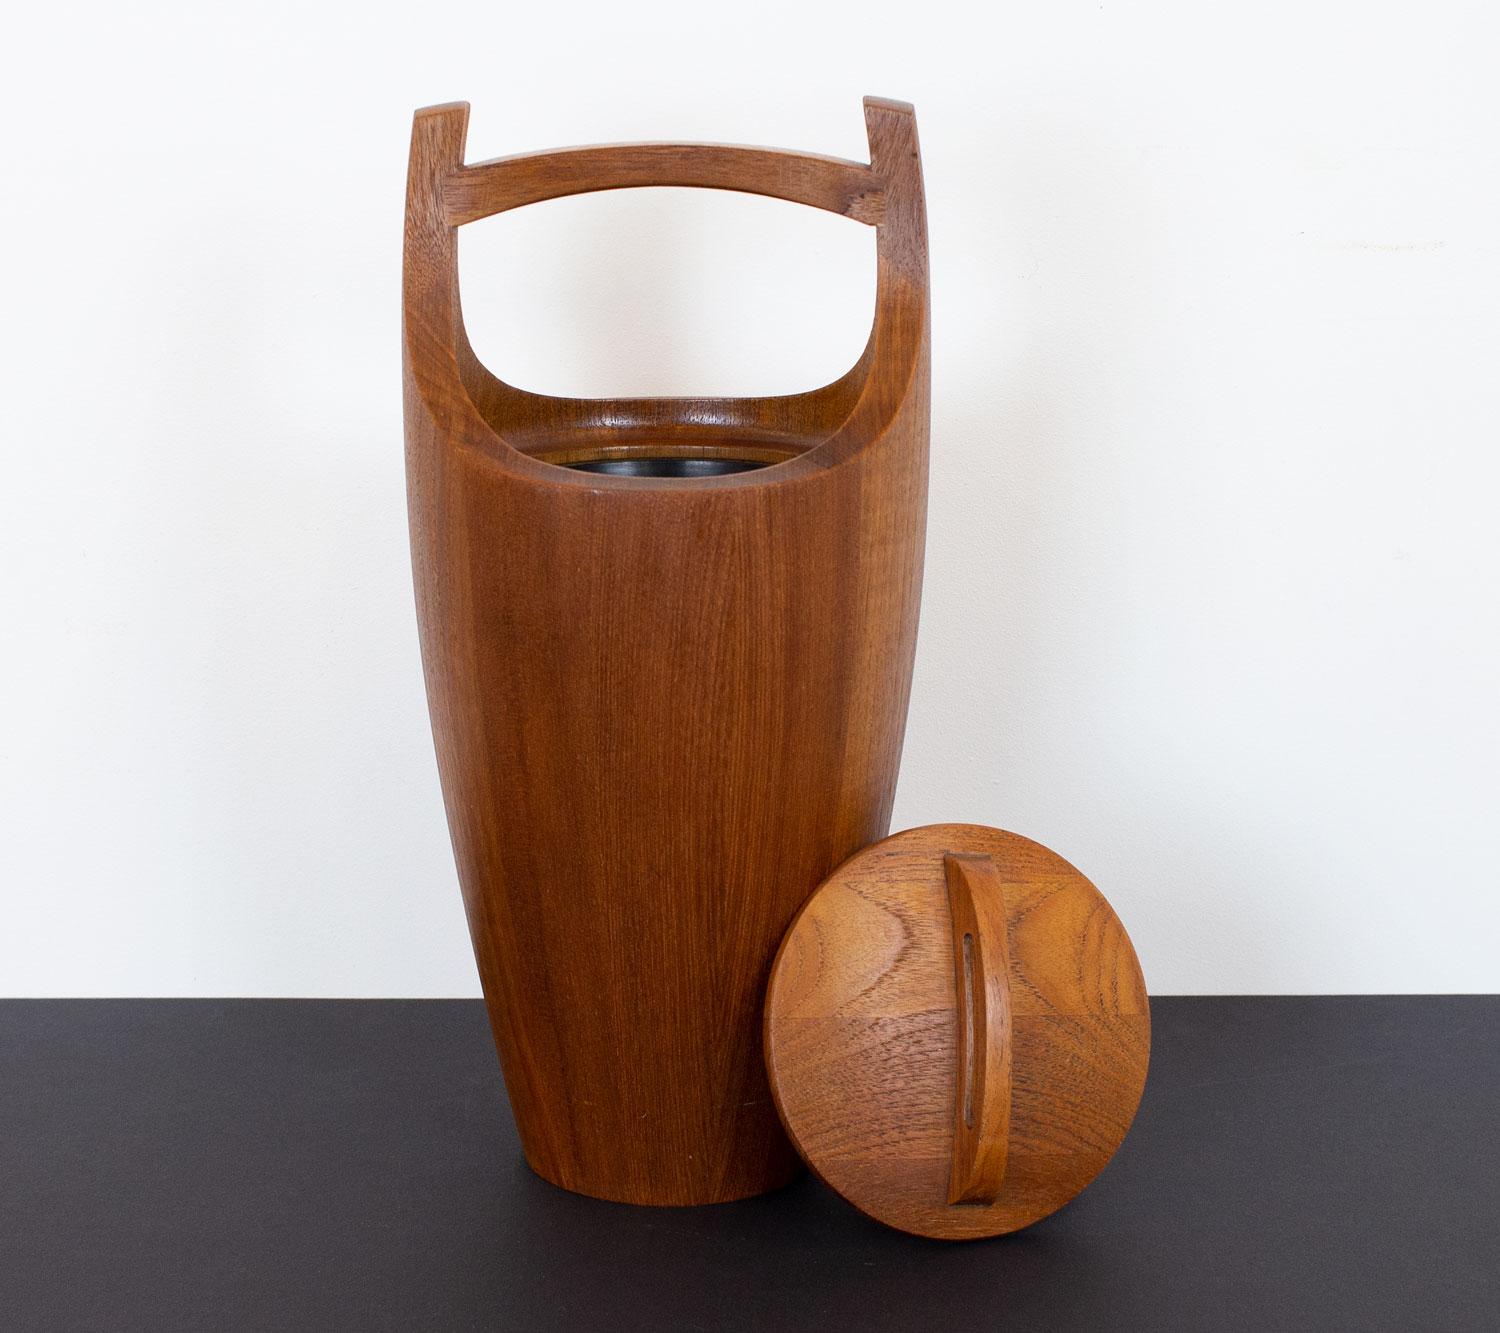 Congo ice bucket made of staved teak with a black plastic liner designed by Jens Quistgaard, a Danish sculptor and Industrial designer, in the late 1950s for Dansk Designs.